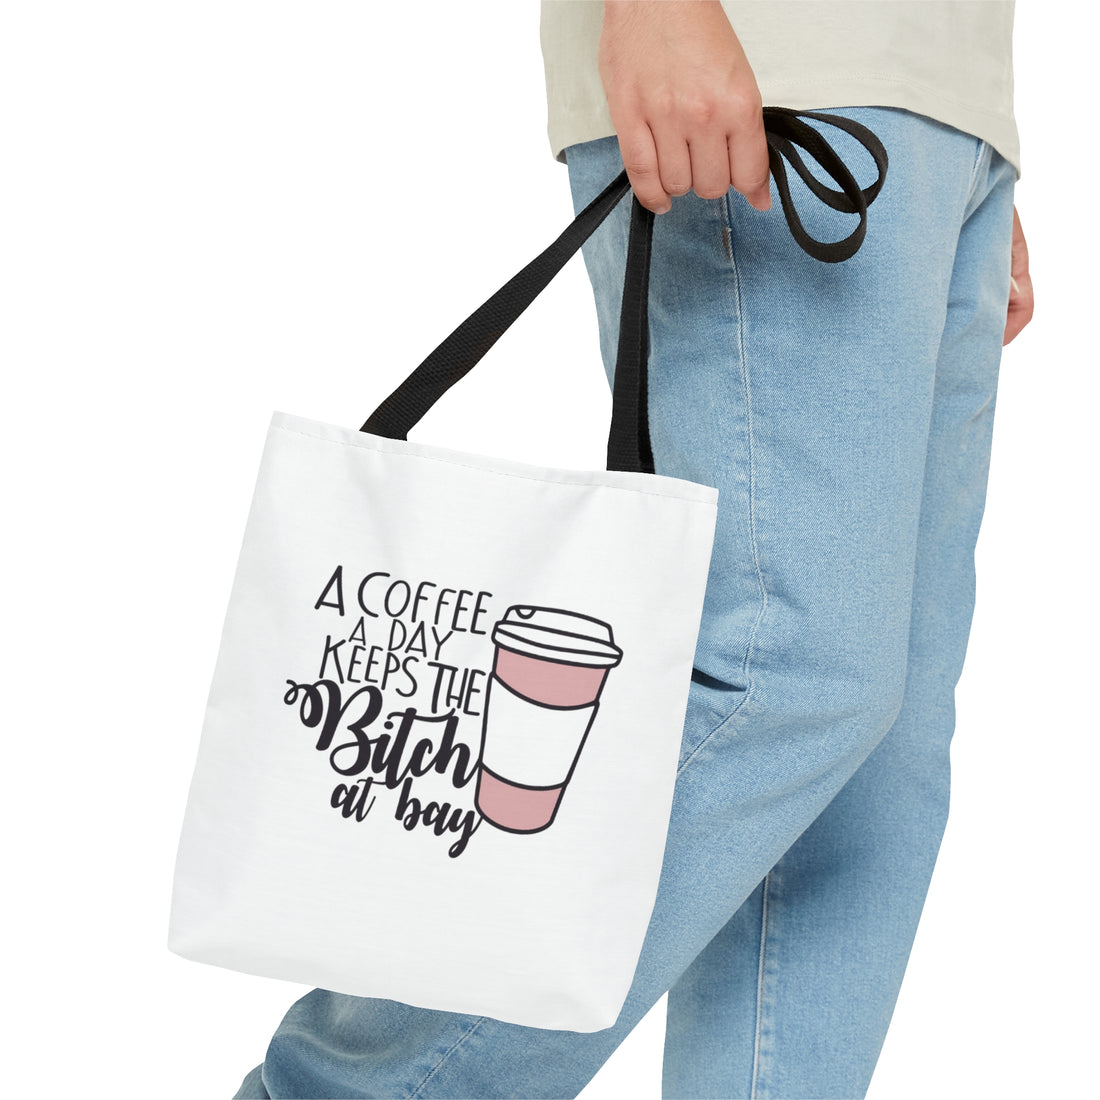 A Coffee a Day Keeps the B!tch at Bay Tote Bag